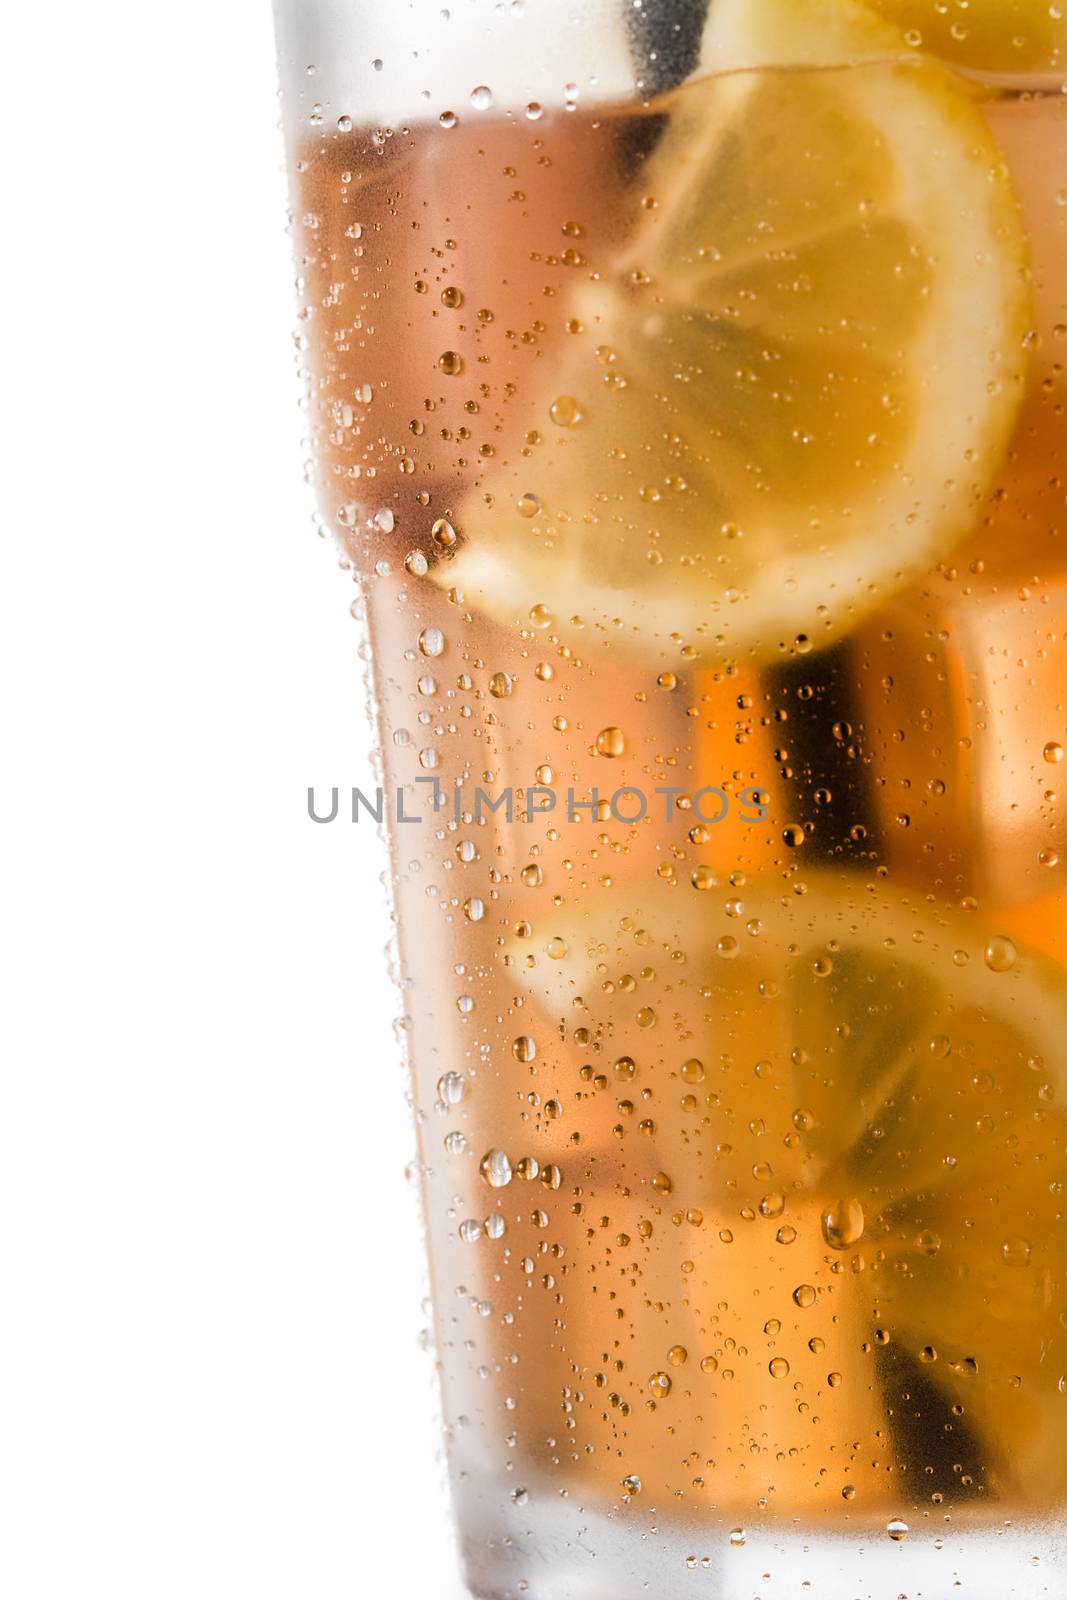 Iced tea drink with lemon in glass by chandlervid85